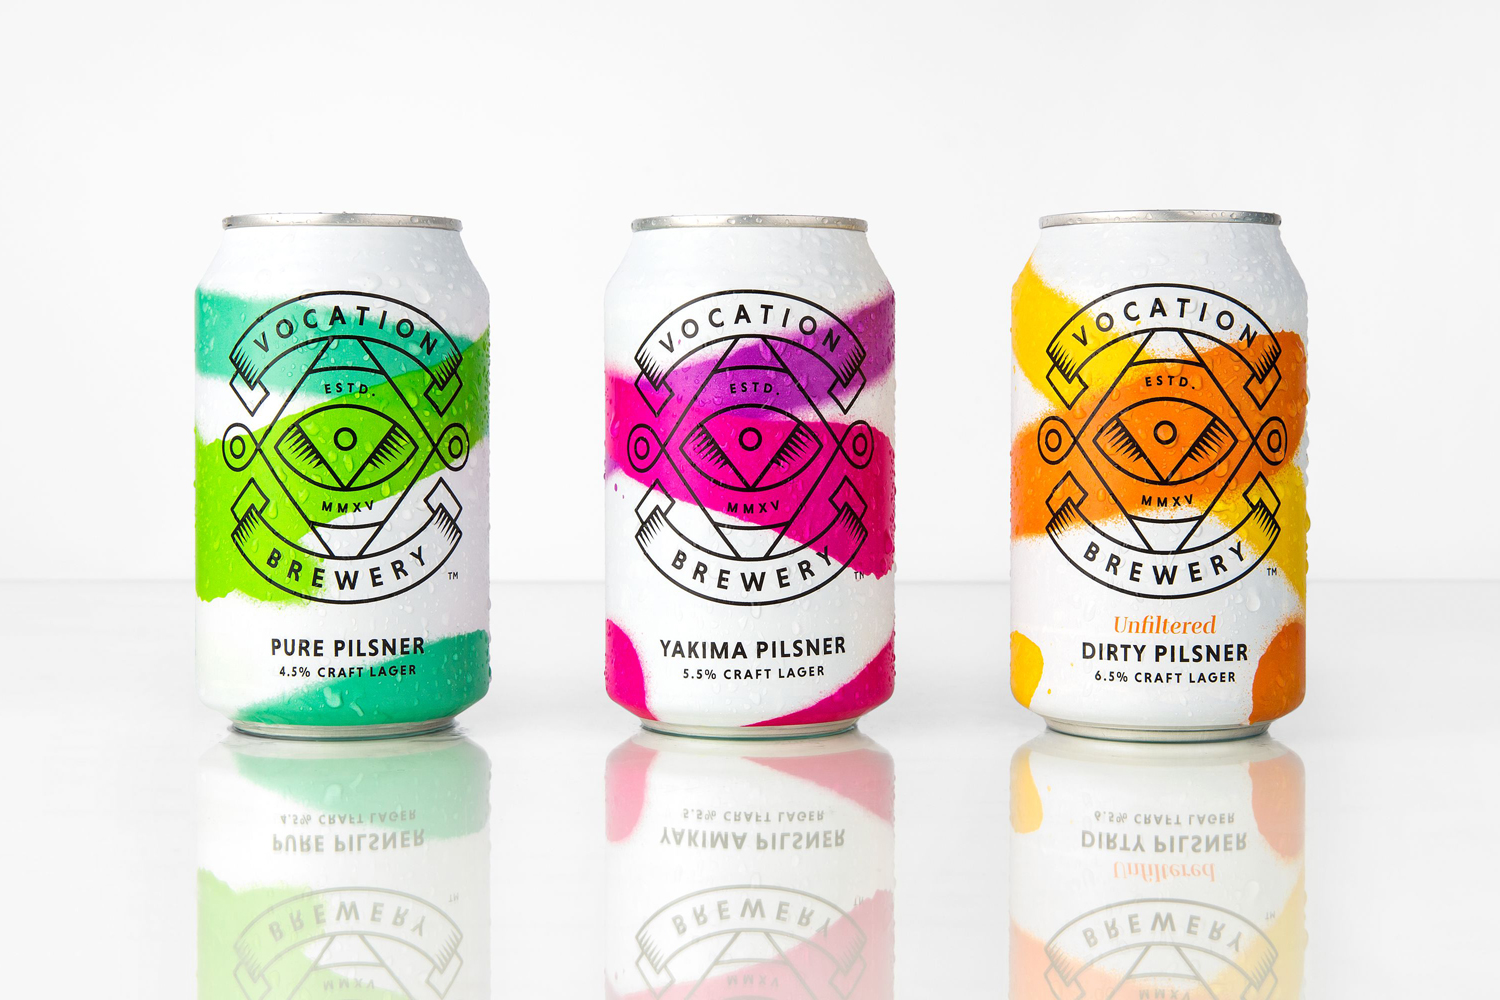 Packaging design by Robot Food for British brewery Vocation's latest release, a craft lager.